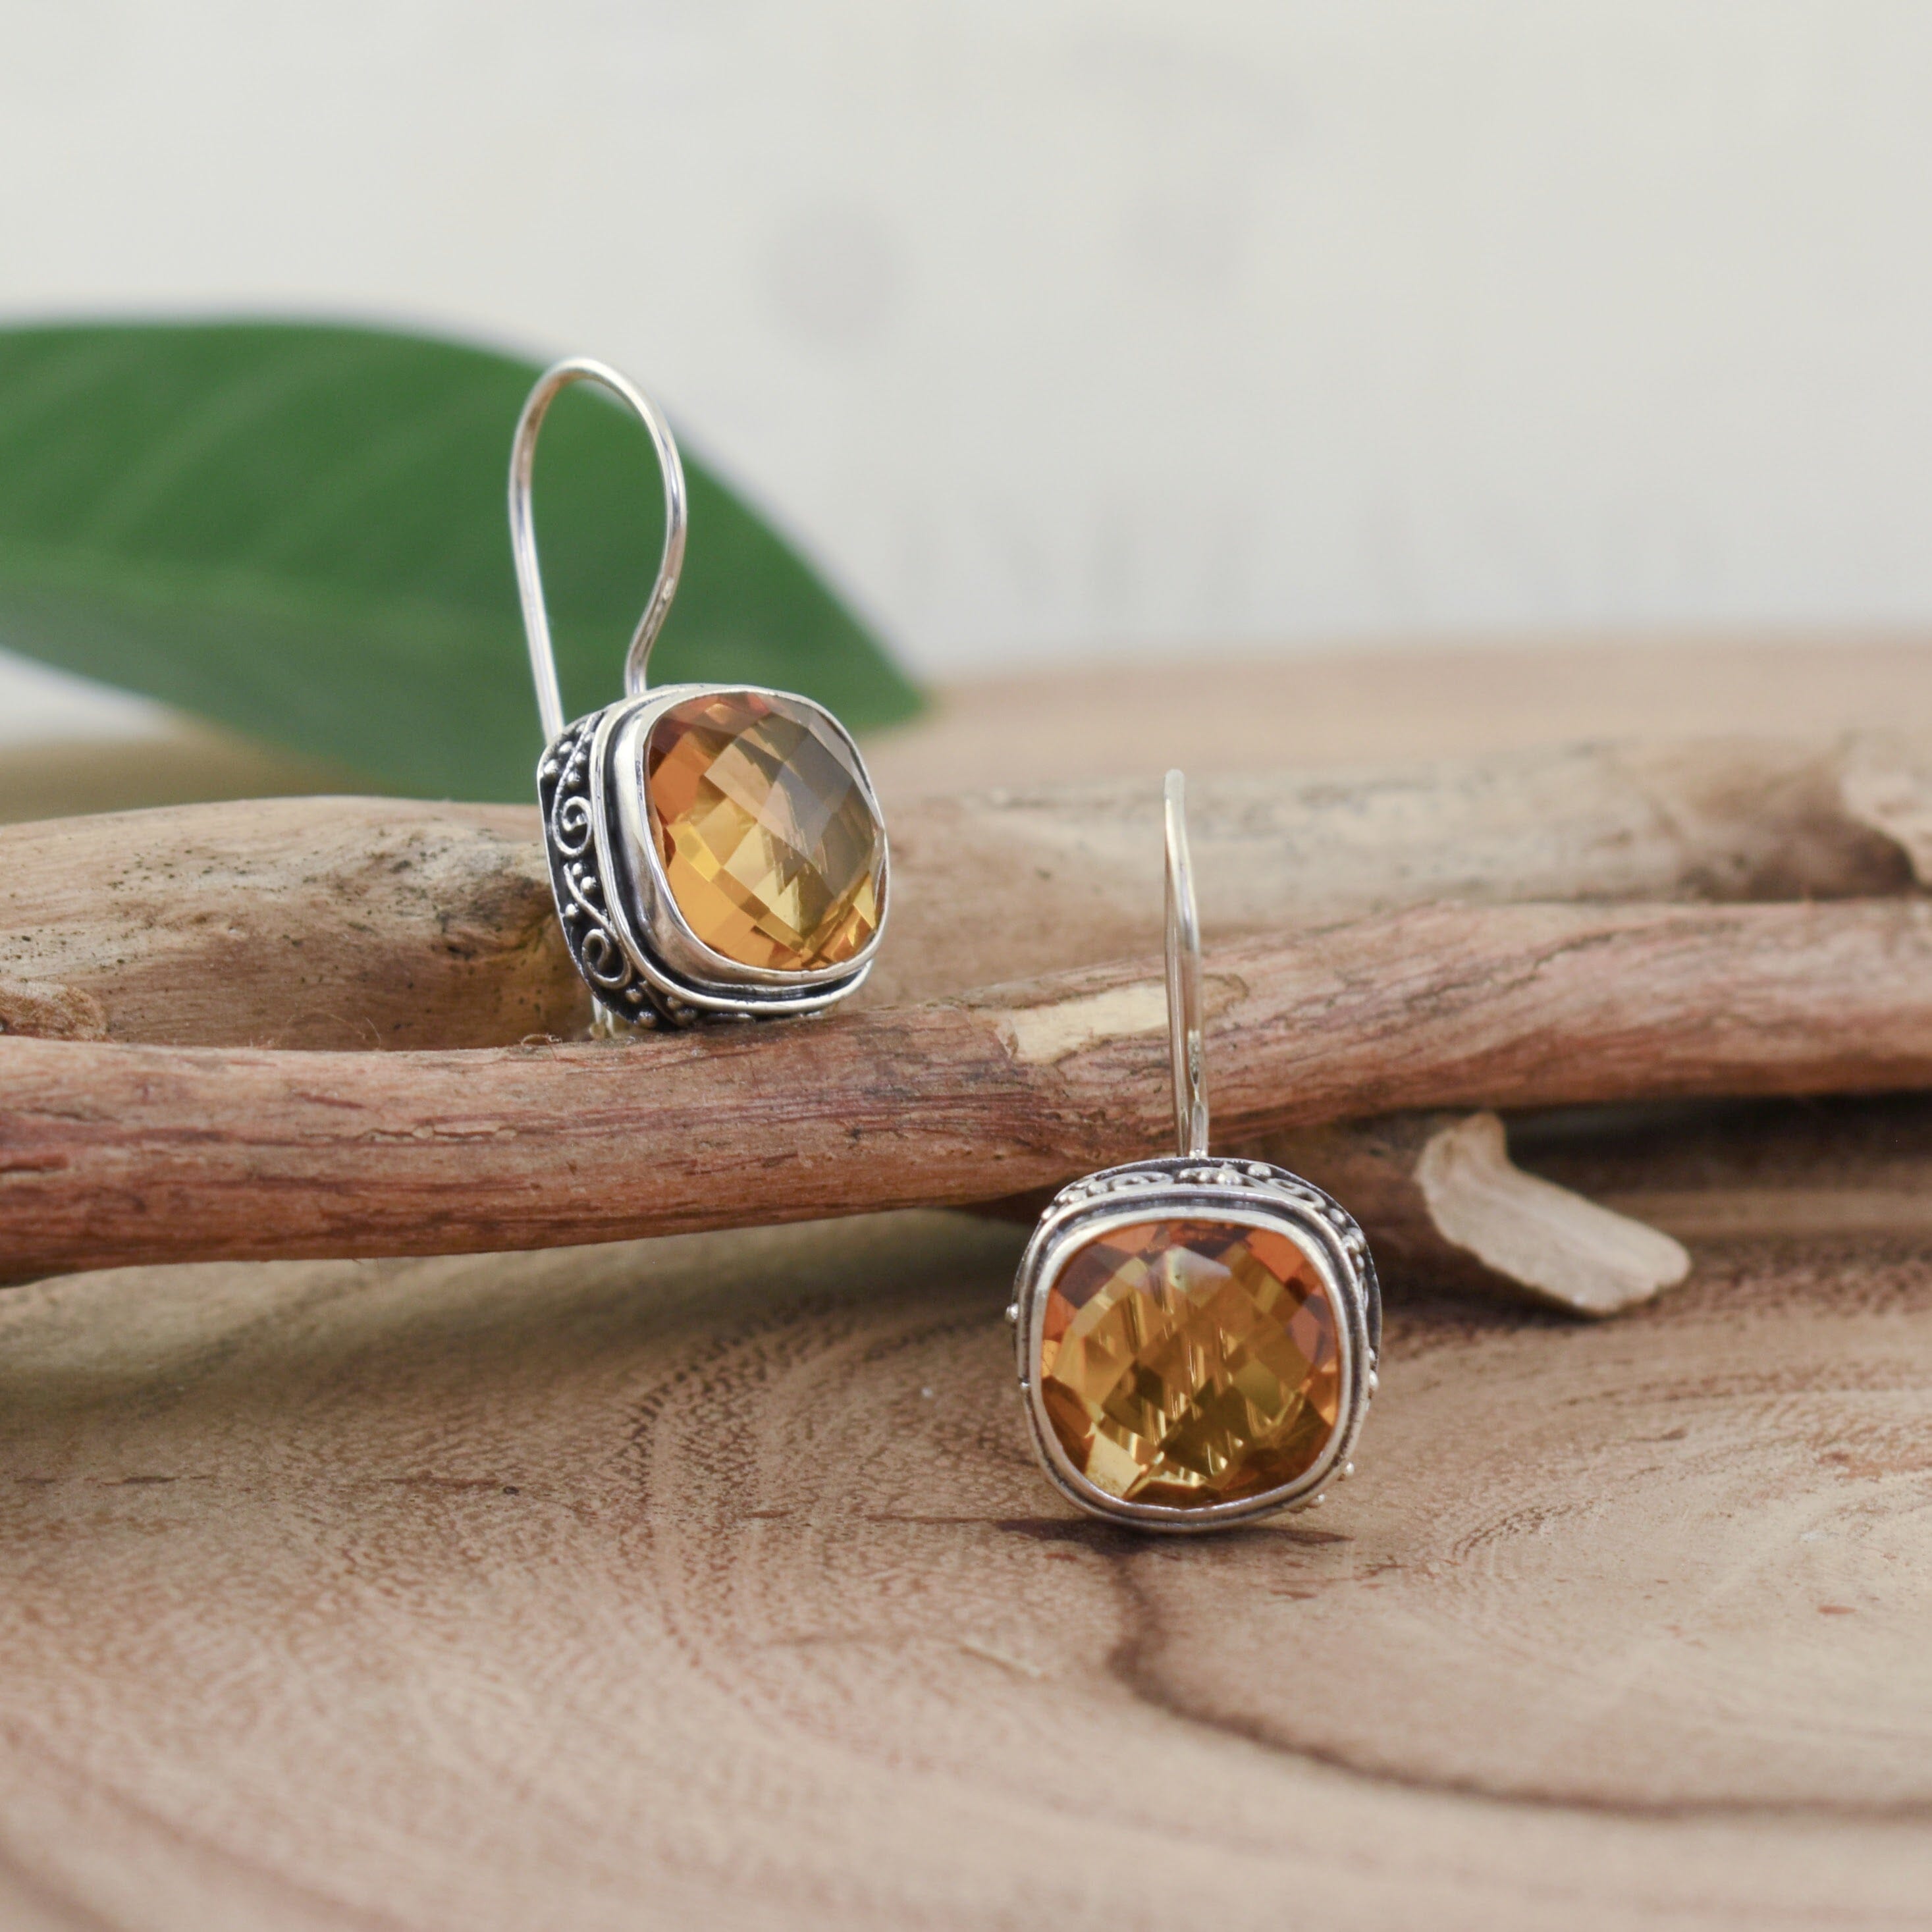 Secure French back earrings in sterling silver and genuine citrine stones